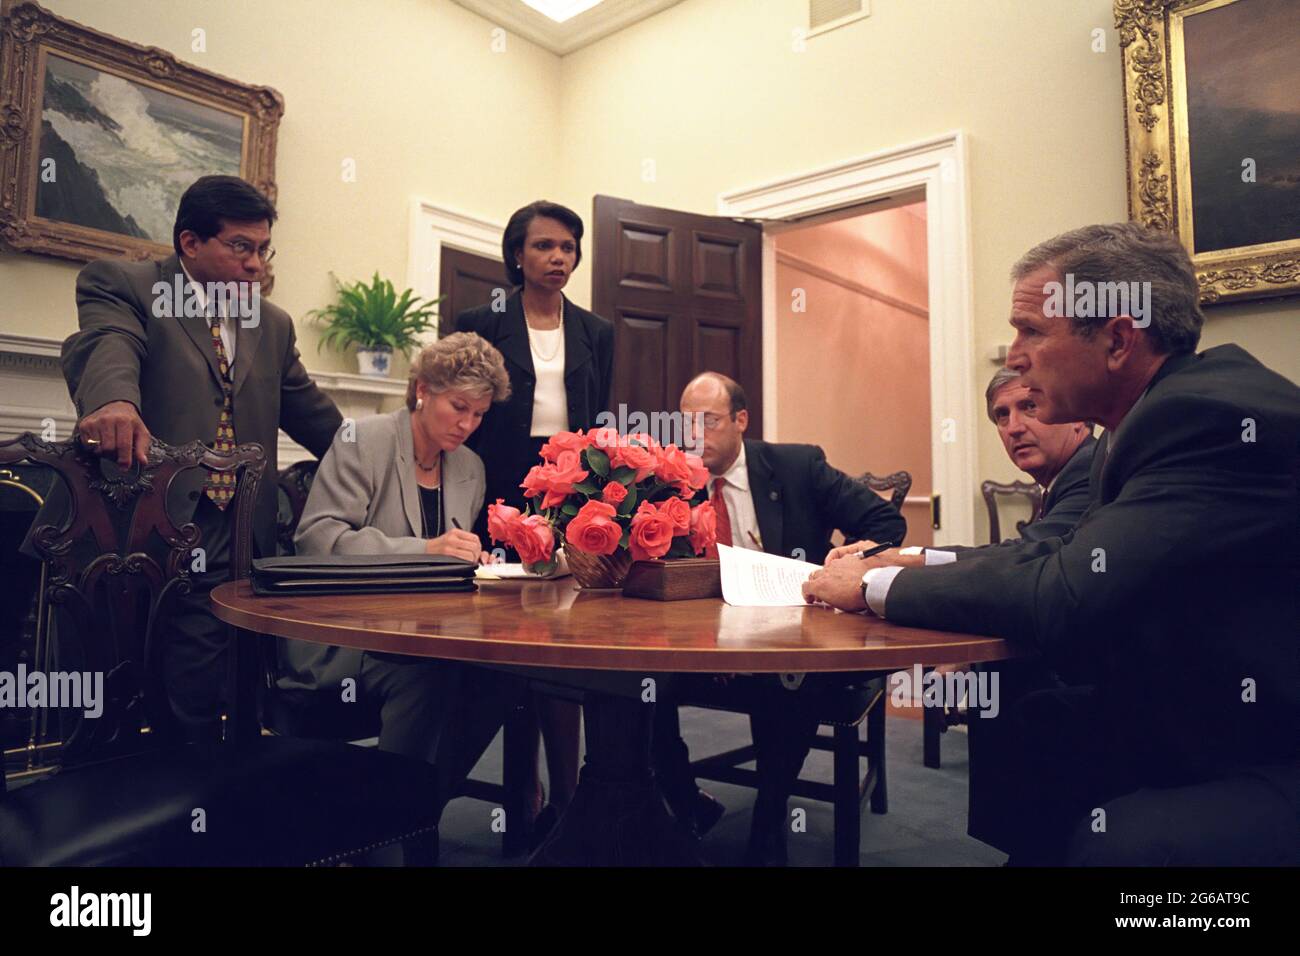 Working with his senior staff, President George W. Bush reviews the speech that he will deliver to the nation from the Oval Office the evening of Tuesday, Sept. 11, 2001. Pictured from left are: Alberto Gonzales, White House Counsel; Karen Hughes, Counselor; Condoleezza Rice, National Security Adviser; Ari Fleischer, Press Secretary, and Andy Card, Chief of Staff.  Photo by Paul Morse, The White House. Stock Photo